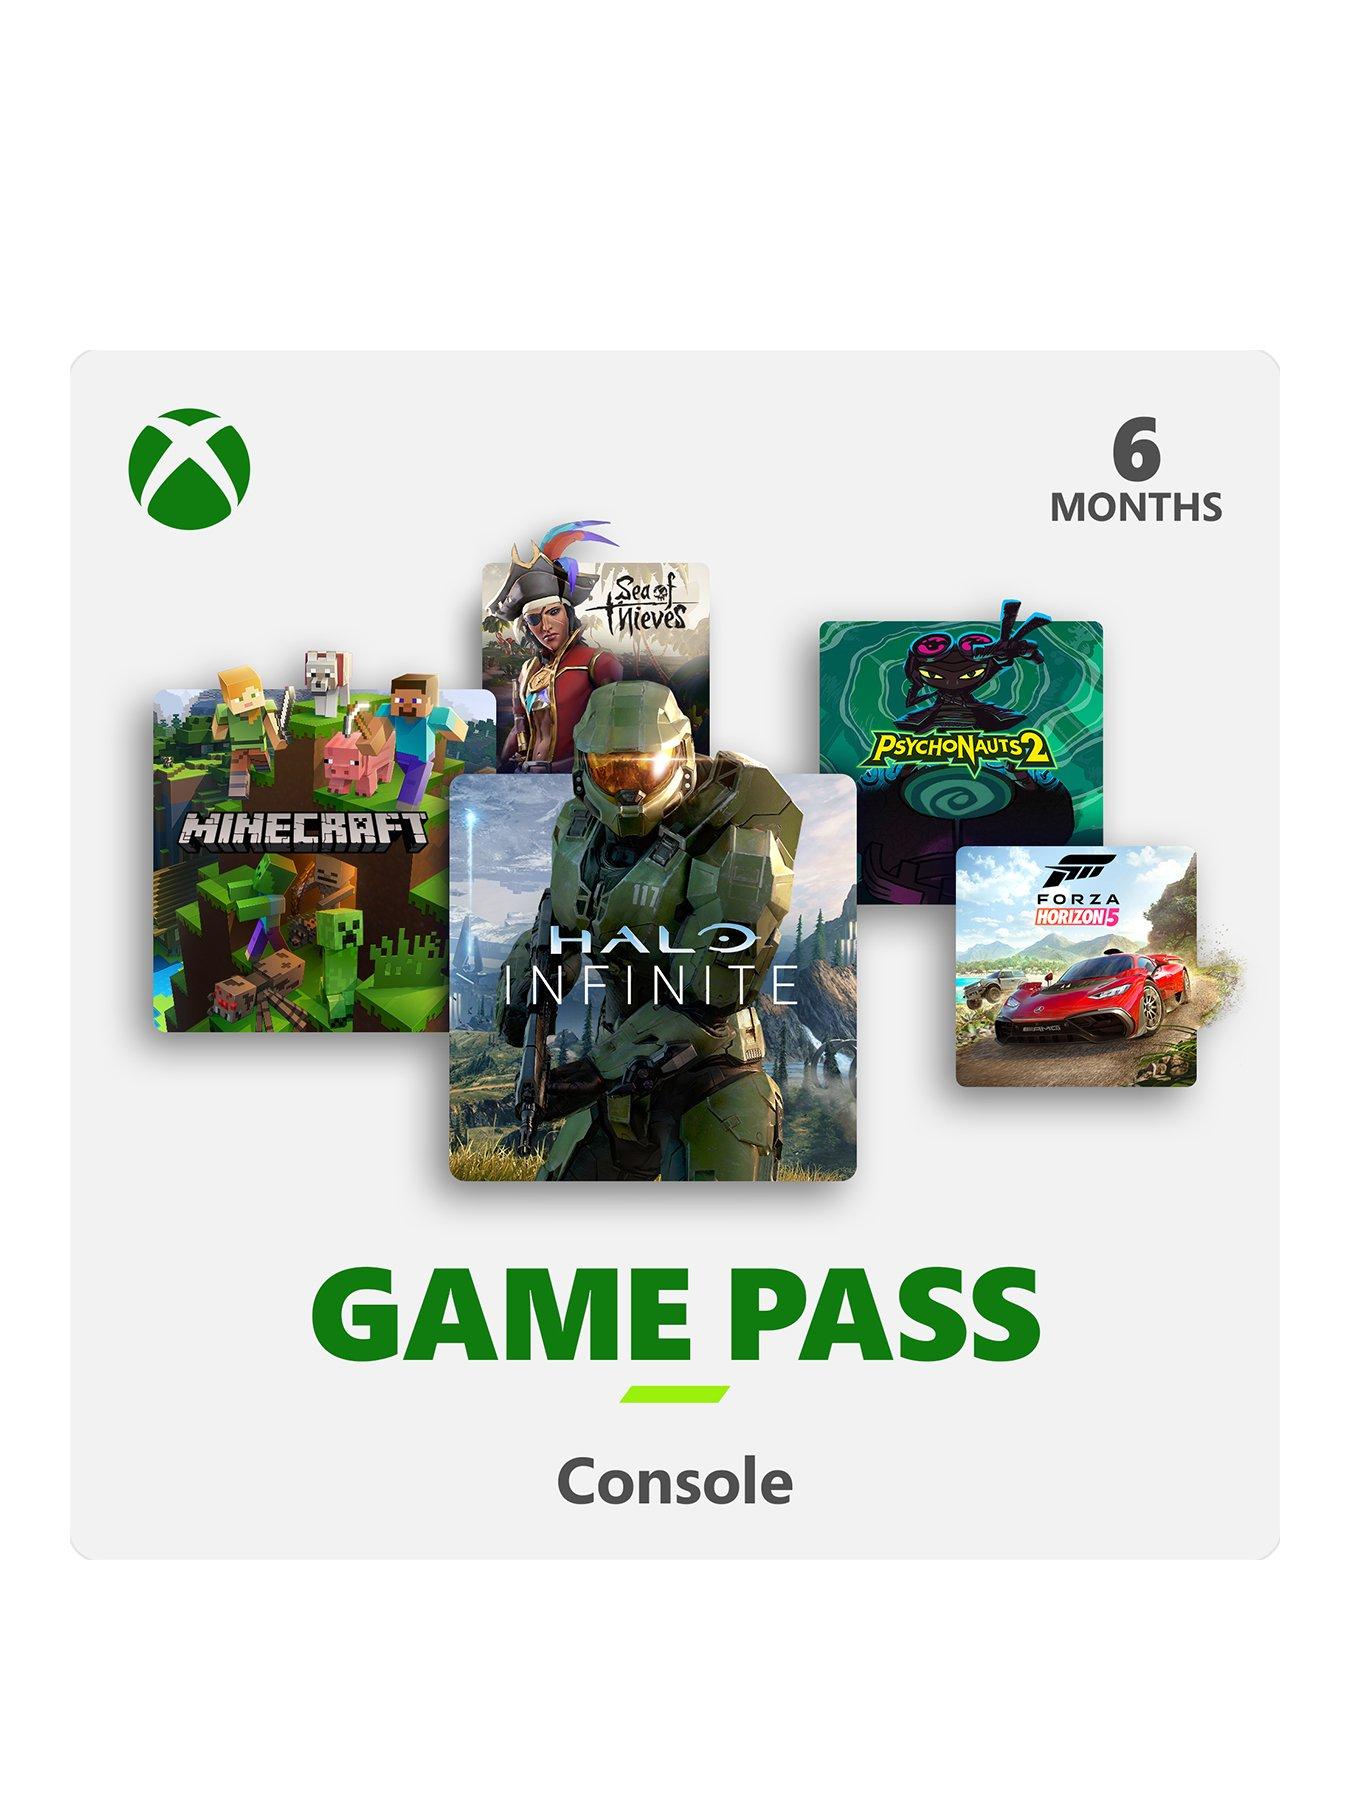 Microsoft's £1/$1 Xbox Game Pass offer cut from a month to 14 days